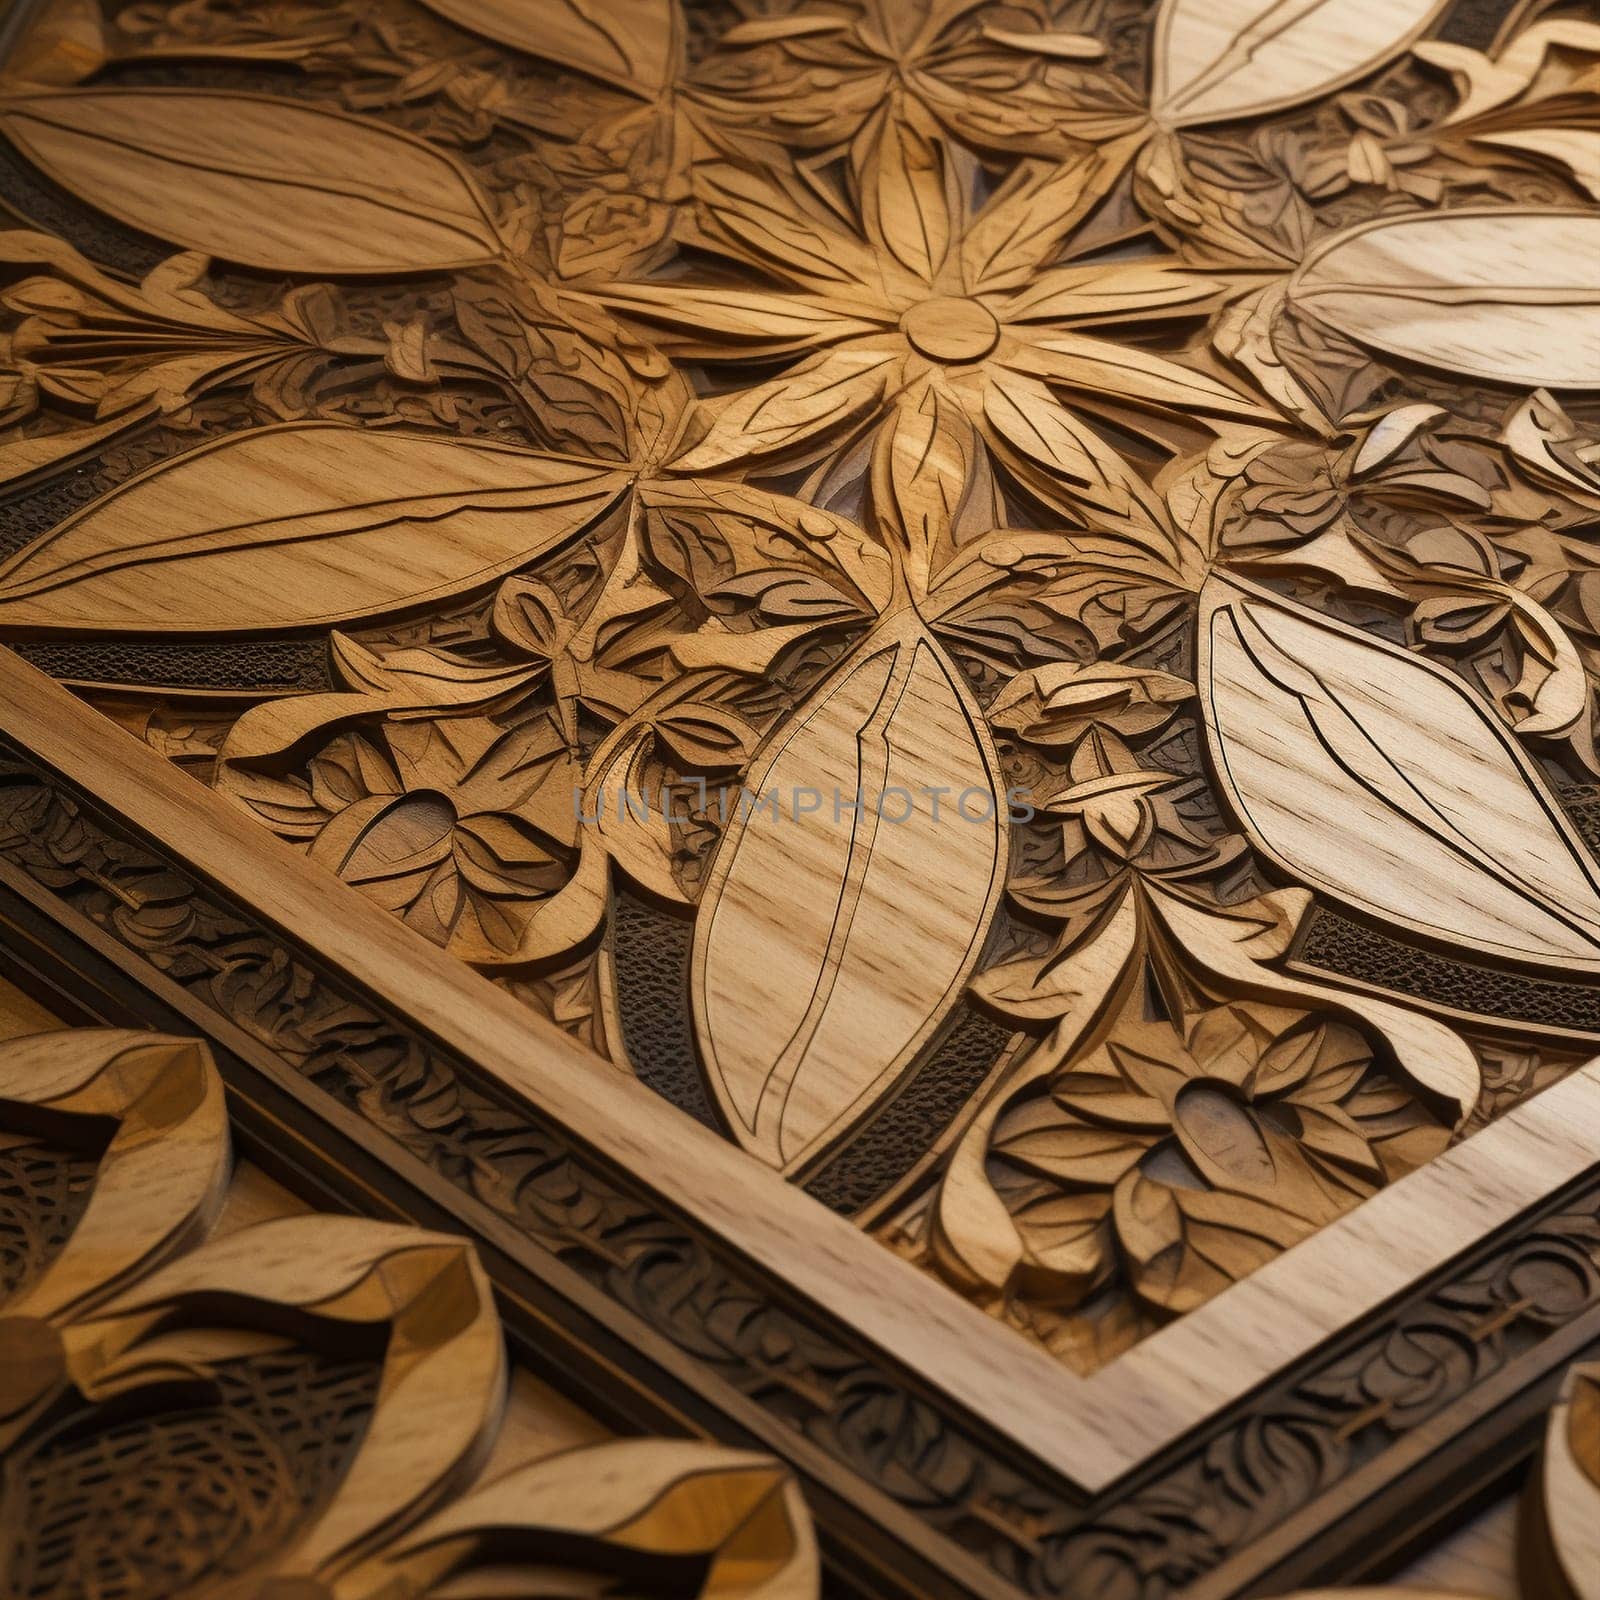 This wood inlay showcase image highlights the beauty of intricate patterns and designs created by inlaying different types of wood. The proper lighting and composition techniques emphasize the precision and skill involved in the inlay process, showcasing the attention to detail and craftsmanship that goes into creating these stunning pieces.